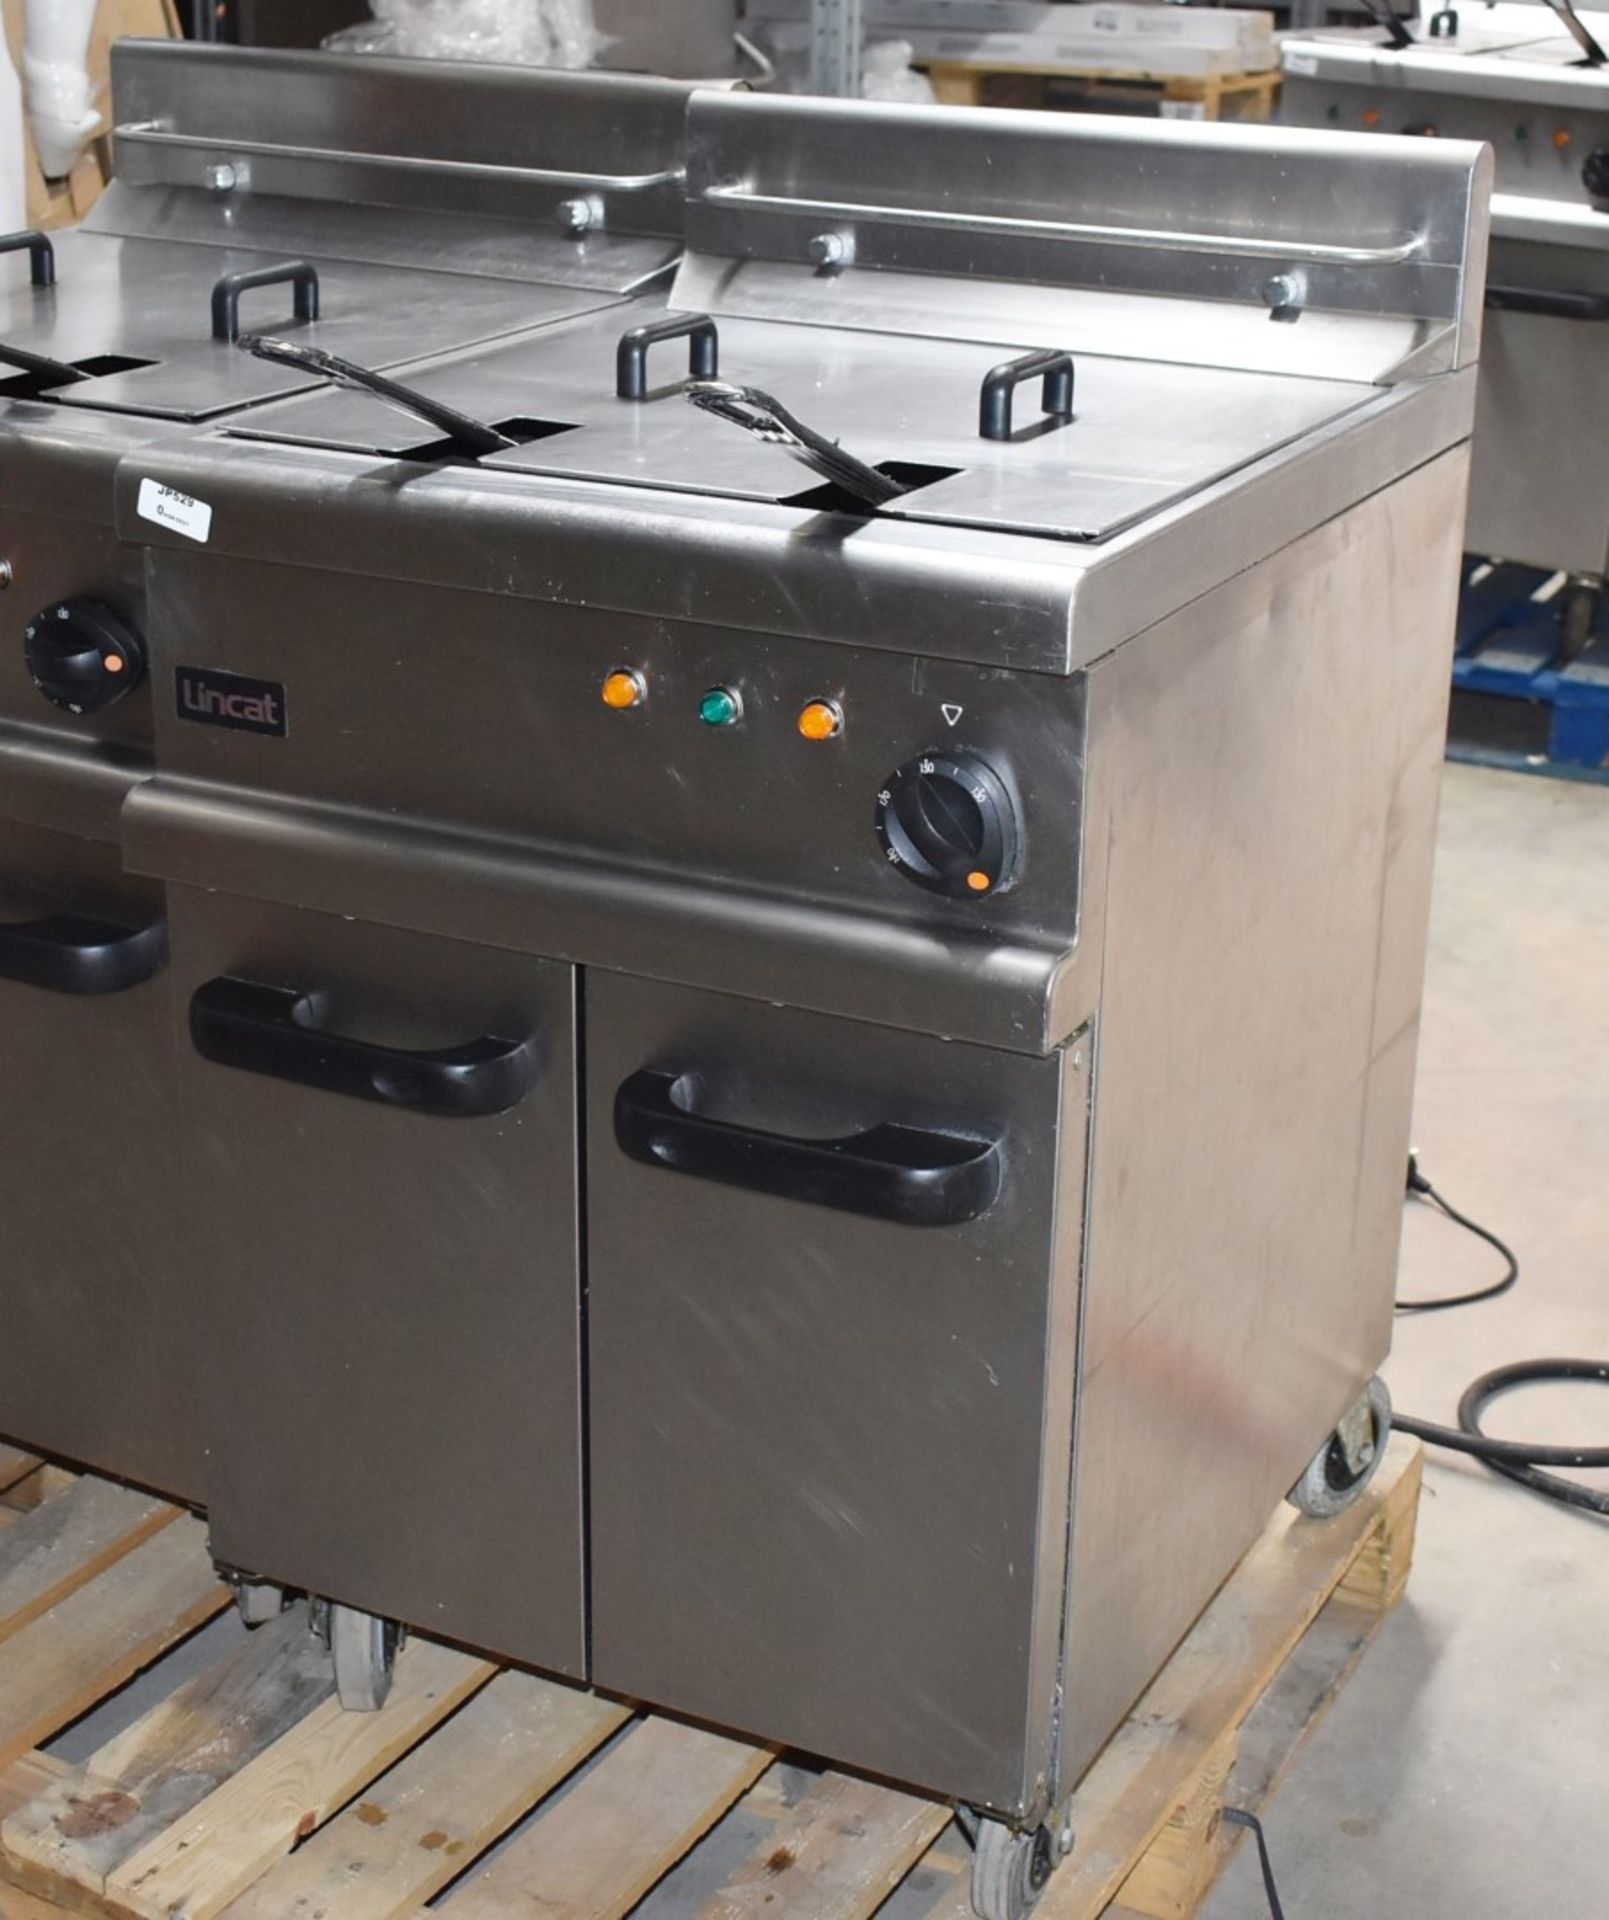 1 x Lincat Opus 700 OE7113 Single Large Tank Electric Fryer With Built In Filteration - 240V / 3PH P - Image 9 of 11